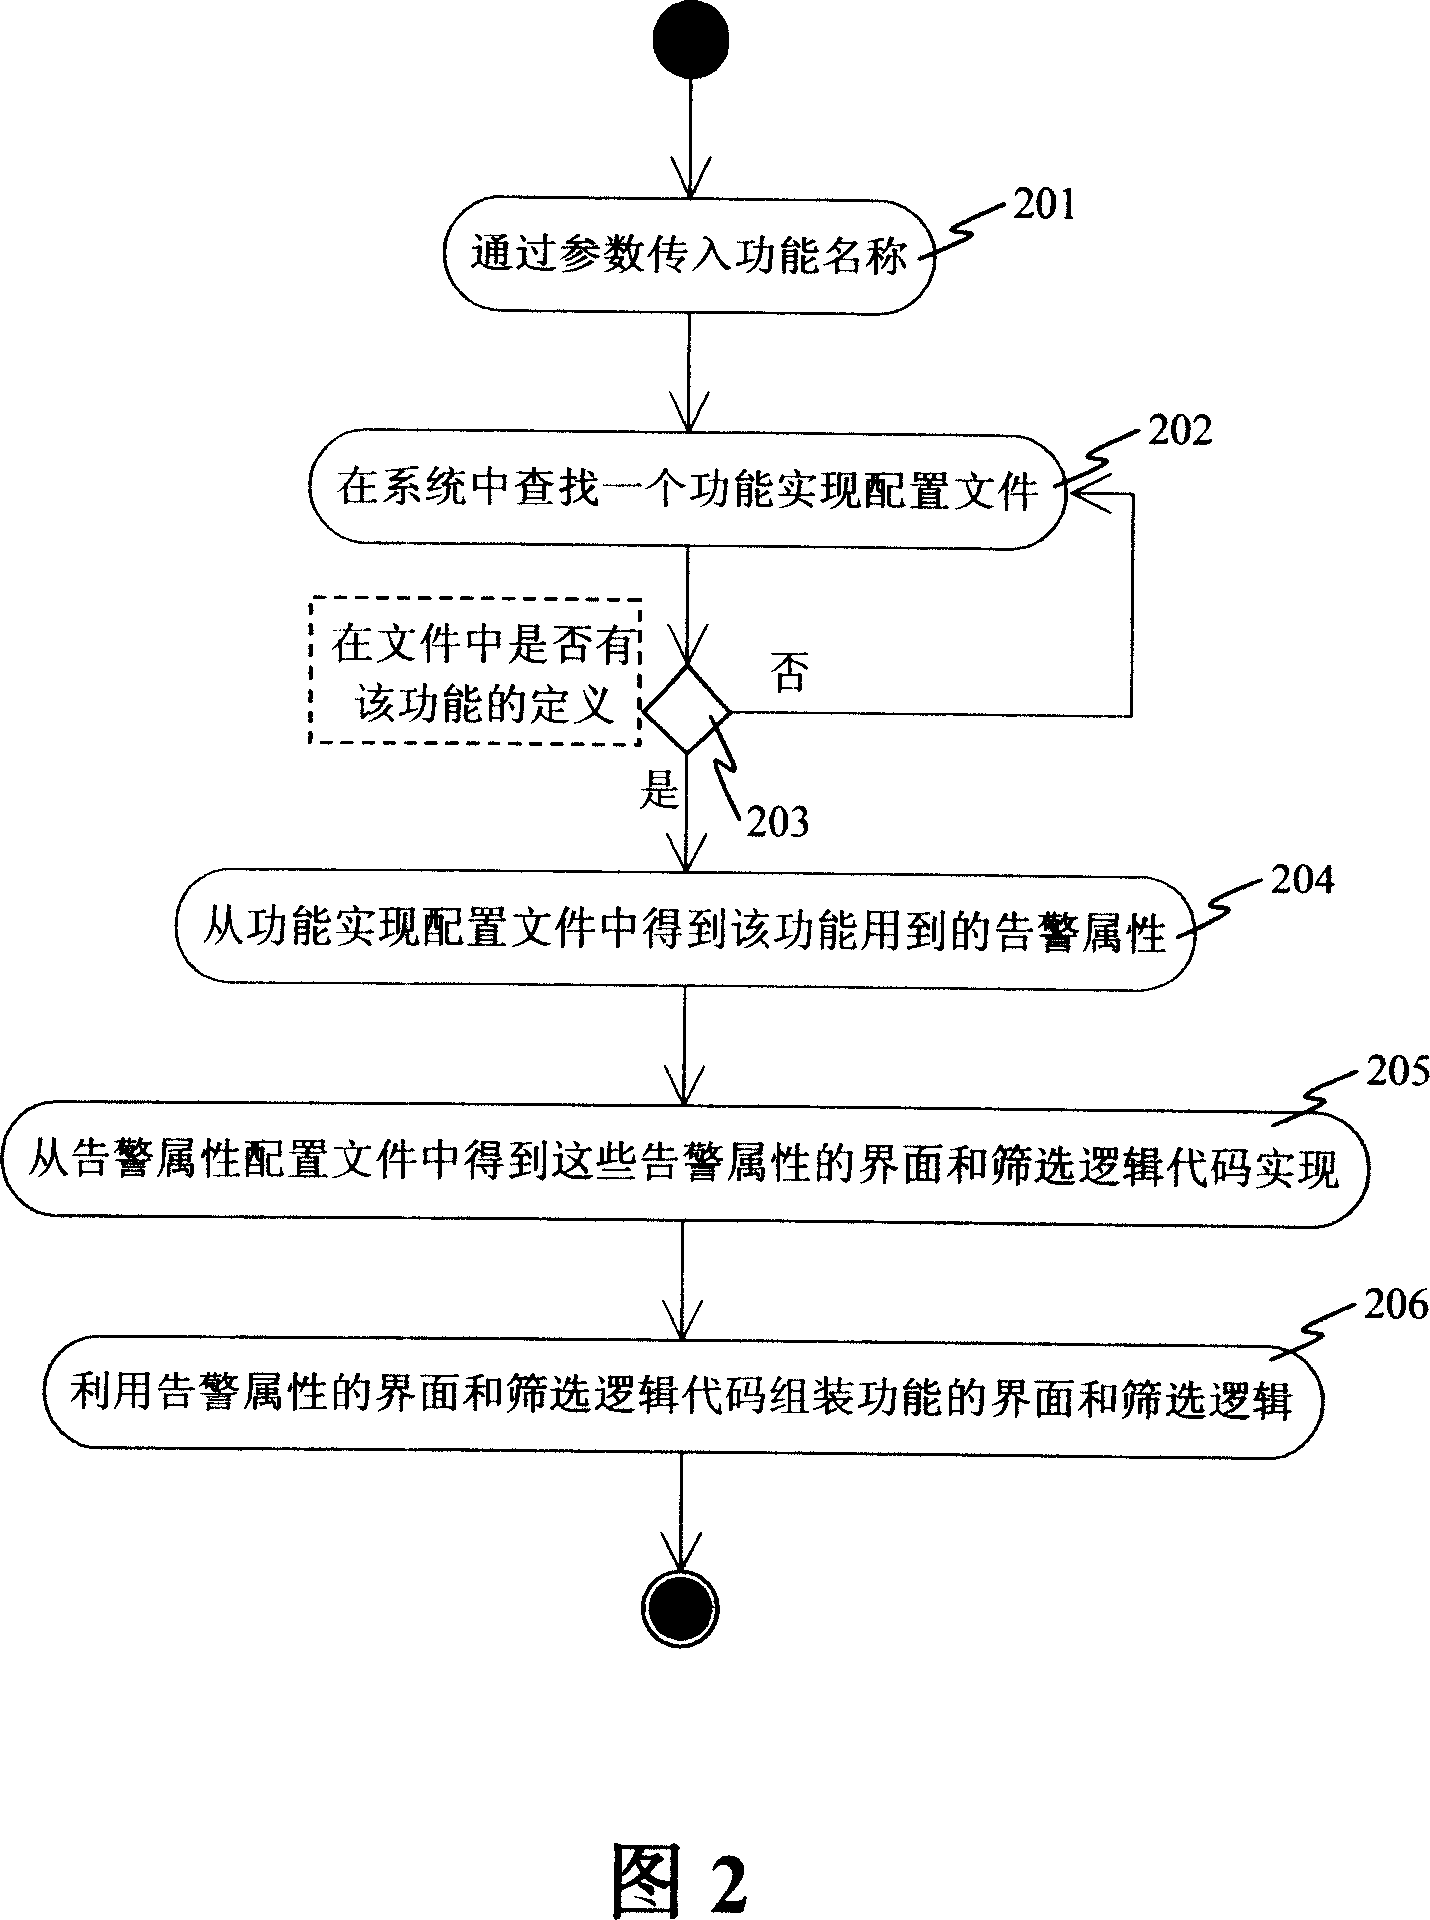 Filtration method for processing alarm rapidly